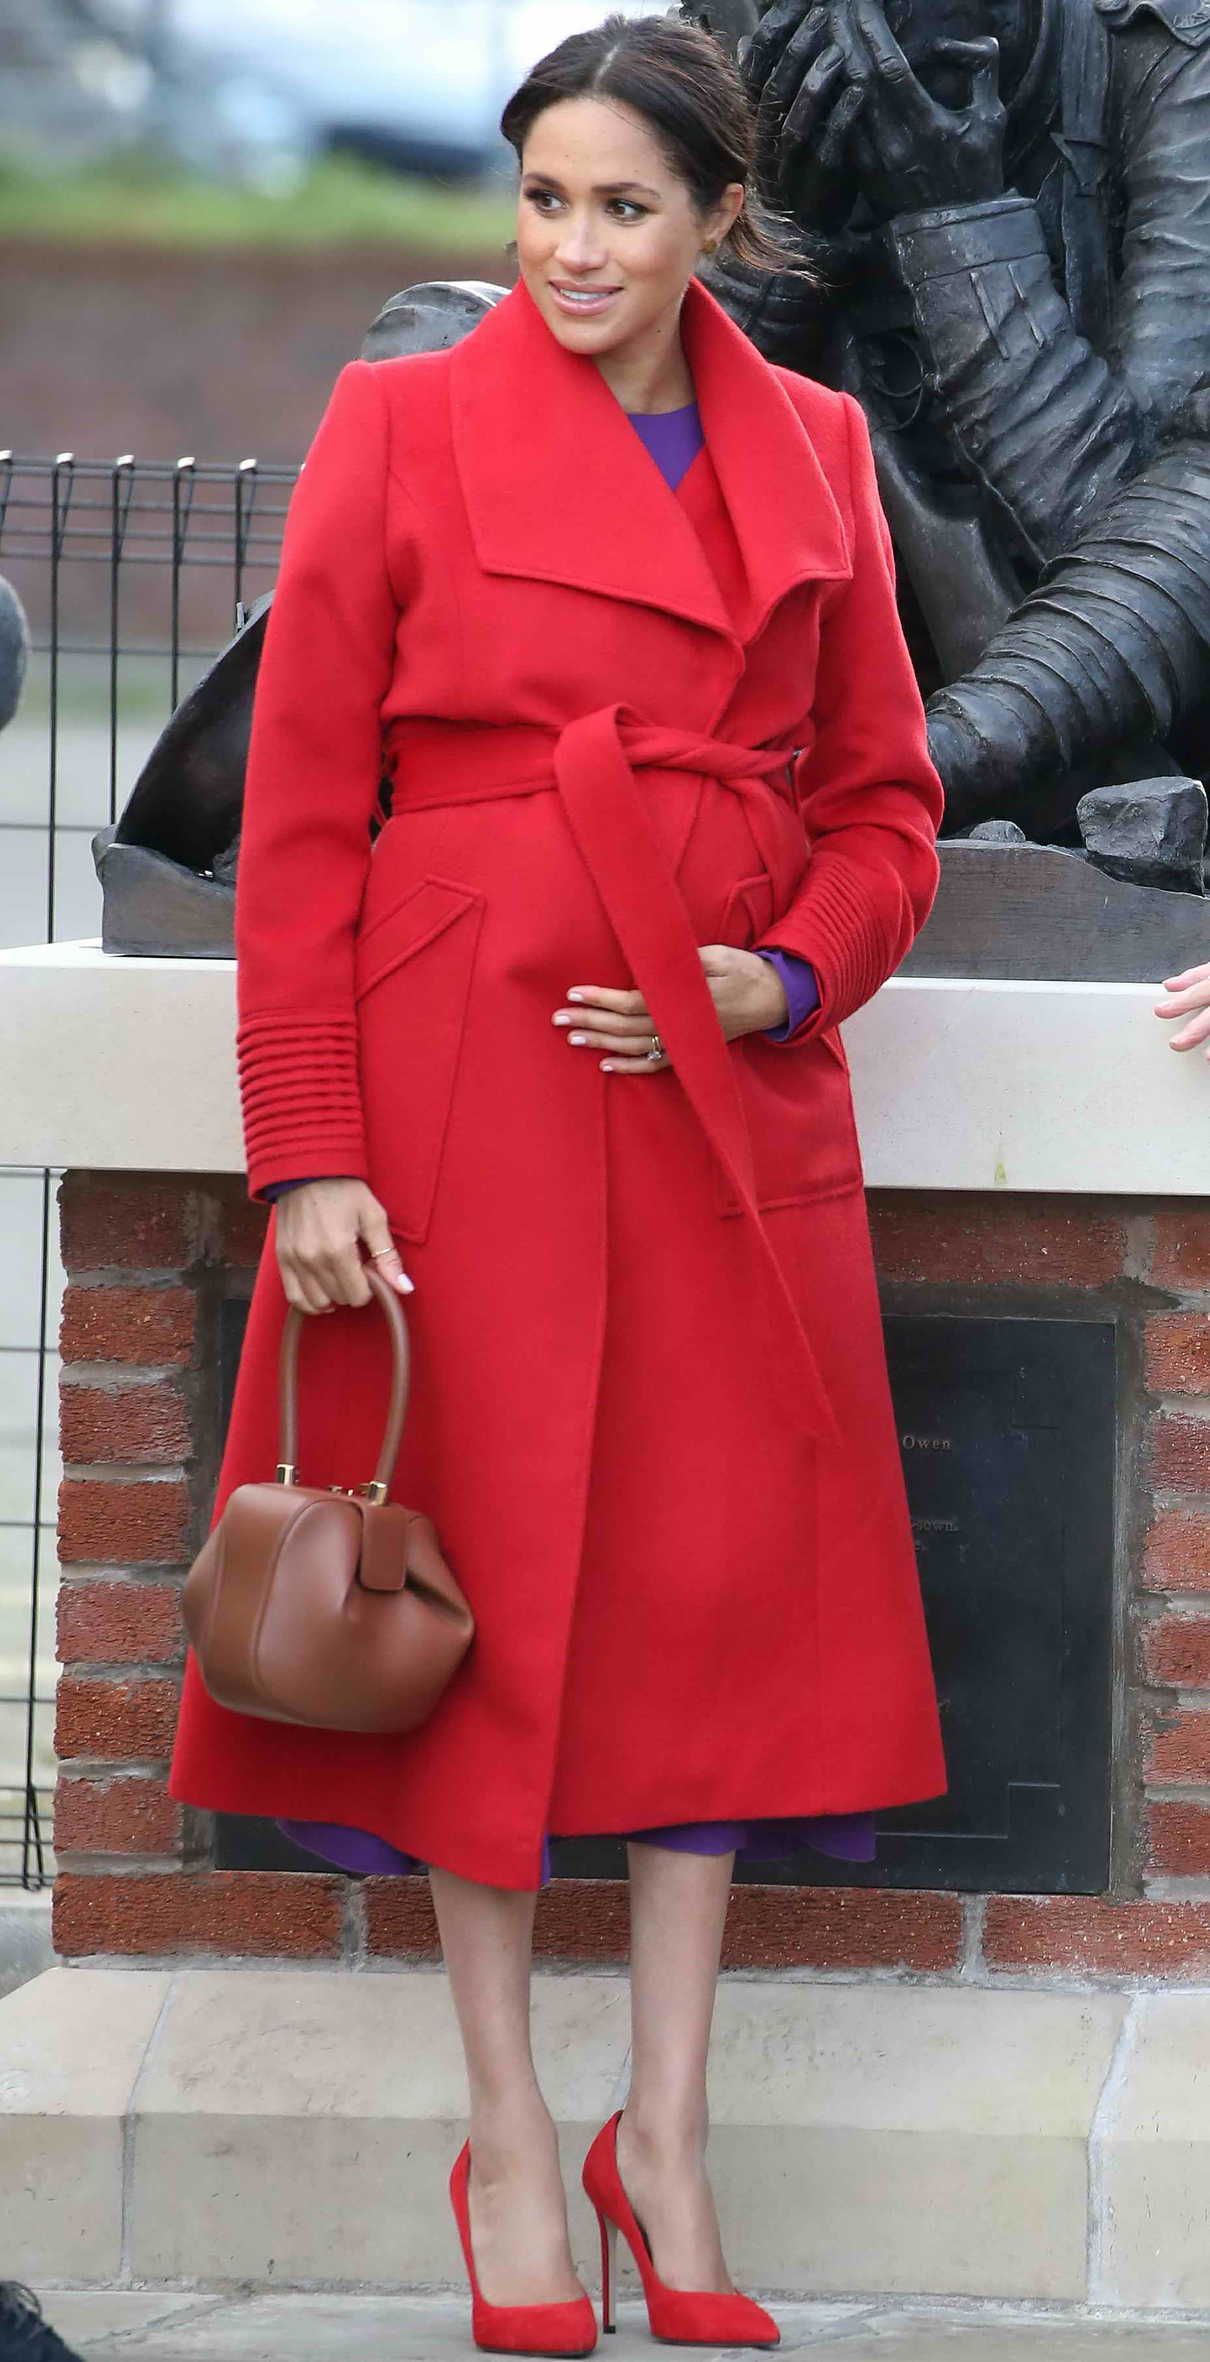 Meghan Markle in a Red Coat